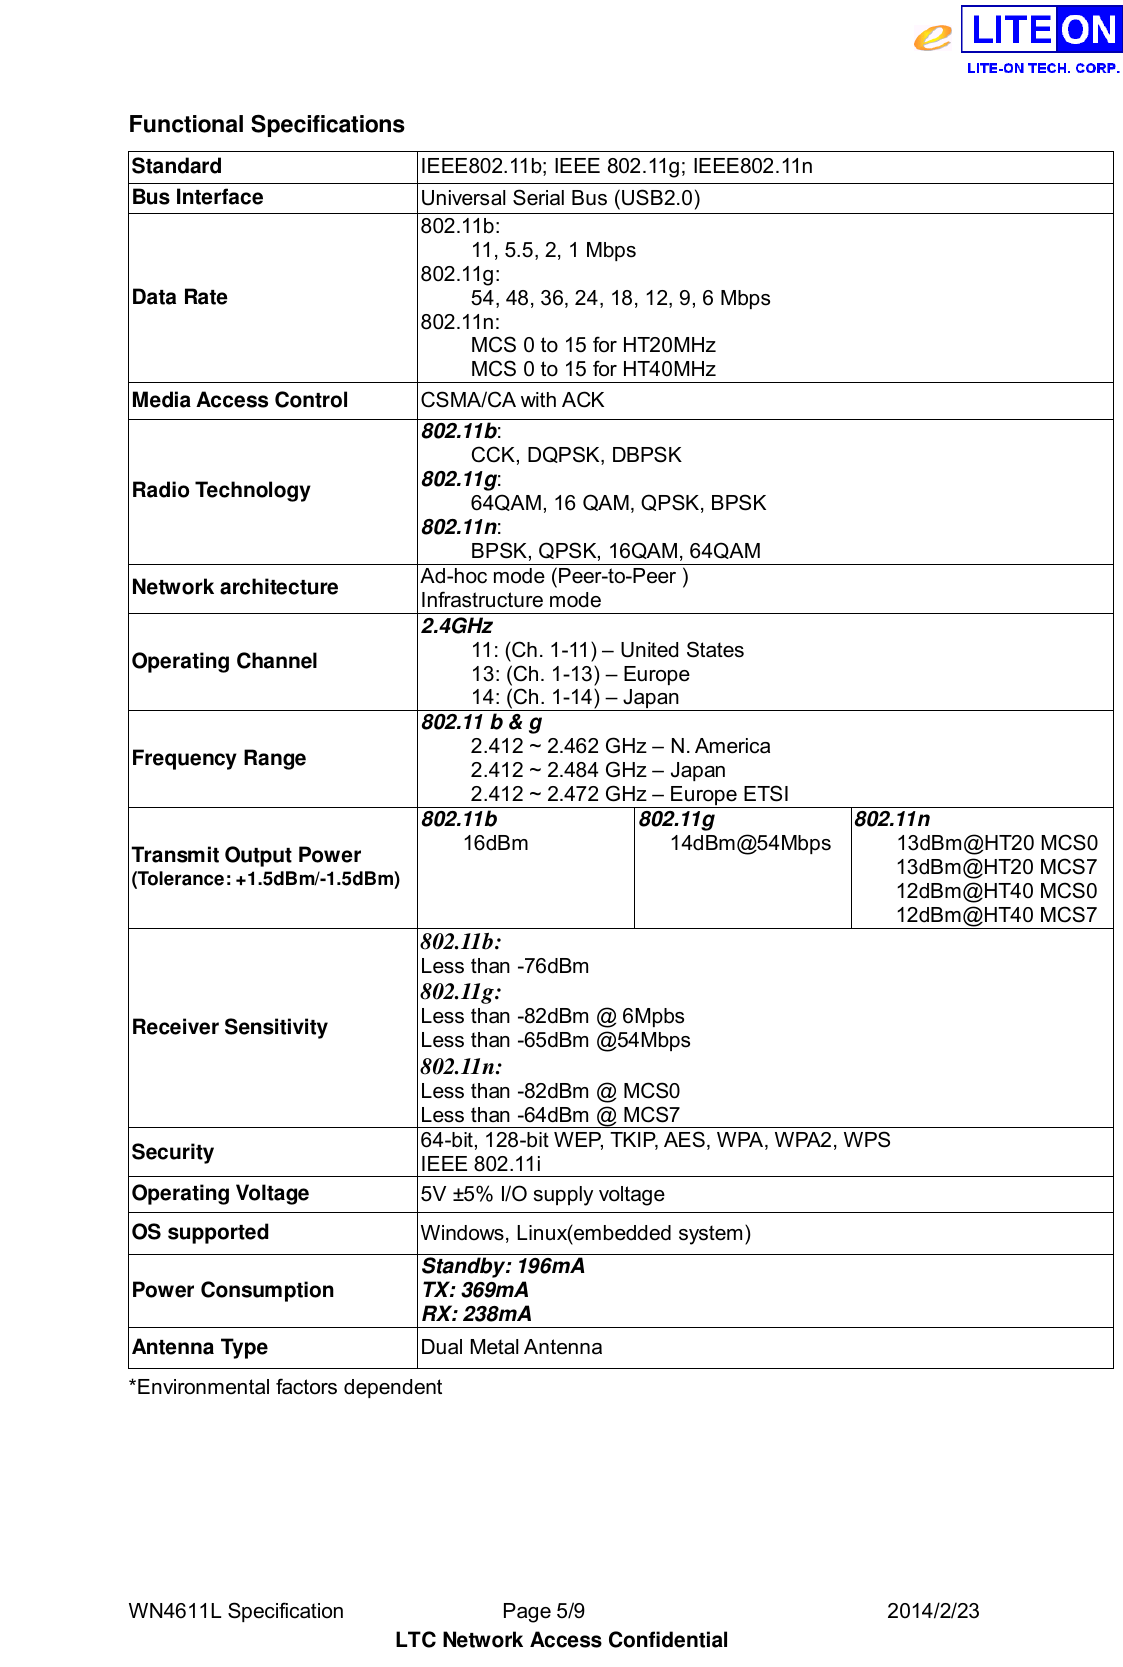  WN4611L Specification               Page 5/9                              2014/2/23 LTC Network Access Confidential Functional Specifications Standard IEEE802.11b; IEEE 802.11g; IEEE802.11n Bus Interface Universal Serial Bus (USB2.0) Data Rate 802.11b: 11, 5.5, 2, 1 Mbps 802.11g: 54, 48, 36, 24, 18, 12, 9, 6 Mbps 802.11n:   MCS 0 to 15 for HT20MHz MCS 0 to 15 for HT40MHz Media Access Control CSMA/CA with ACK Radio Technology 802.11b: CCK, DQPSK, DBPSK 802.11g: 64QAM, 16 QAM, QPSK, BPSK 802.11n: BPSK, QPSK, 16QAM, 64QAM Network architecture Ad-hoc mode (Peer-to-Peer ) Infrastructure mode Operating Channel 2.4GHz 11: (Ch. 1-11) – United States 13: (Ch. 1-13) – Europe 14: (Ch. 1-14) – Japan Frequency Range 802.11 b &amp; g 2.412 ~ 2.462 GHz – N. America 2.412 ~ 2.484 GHz – Japan 2.412 ~ 2.472 GHz – Europe ETSI Transmit Output Power (Tolerance: +1.5dBm/-1.5dBm) 802.11b     16dBm 802.11g    14dBm@54Mbps 802.11n     13dBm@HT20 MCS0     13dBm@HT20 MCS7     12dBm@HT40 MCS0     12dBm@HT40 MCS7 Receiver Sensitivity 802.11b: Less than -76dBm   802.11g: Less than -82dBm @ 6Mpbs Less than -65dBm @54Mbps   802.11n: Less than -82dBm @ MCS0 Less than -64dBm @ MCS7 Security 64-bit, 128-bit WEP, TKIP, AES, WPA, WPA2, WPS   IEEE 802.11i Operating Voltage 5V ±5% I/O supply voltage OS supported Windows, Linux(embedded system) Power Consumption Standby: 196mA TX: 369mA RX: 238mA Antenna Type Dual Metal Antenna *Environmental factors dependent   